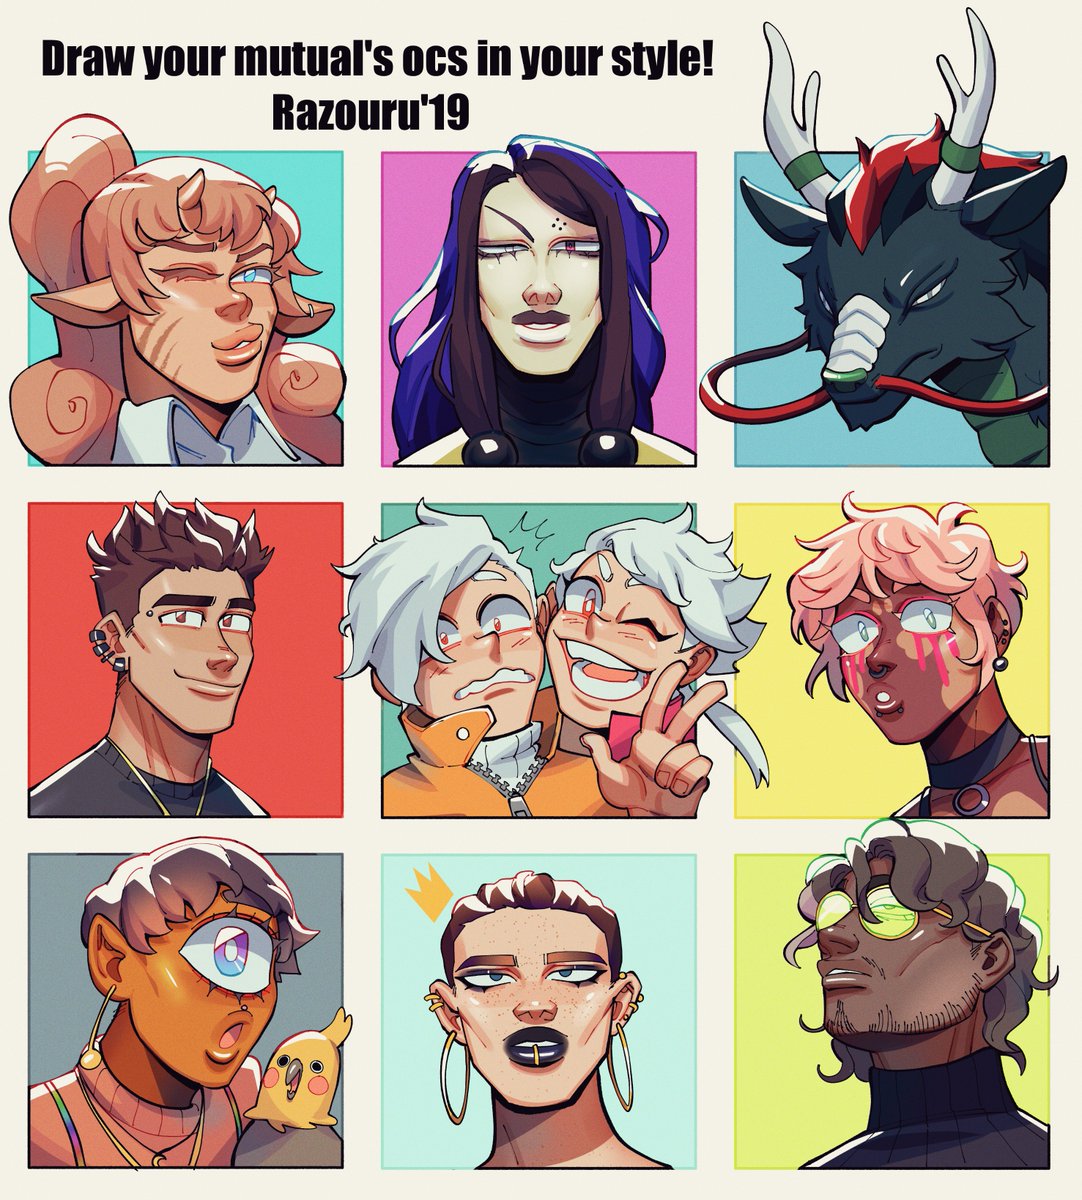 Razouru That Draw Your Friend S Ocs In Your Style Meme With Mutuals On My Instagram I Ll Them On My Instagram I M Too Tired To Do That Rn It S